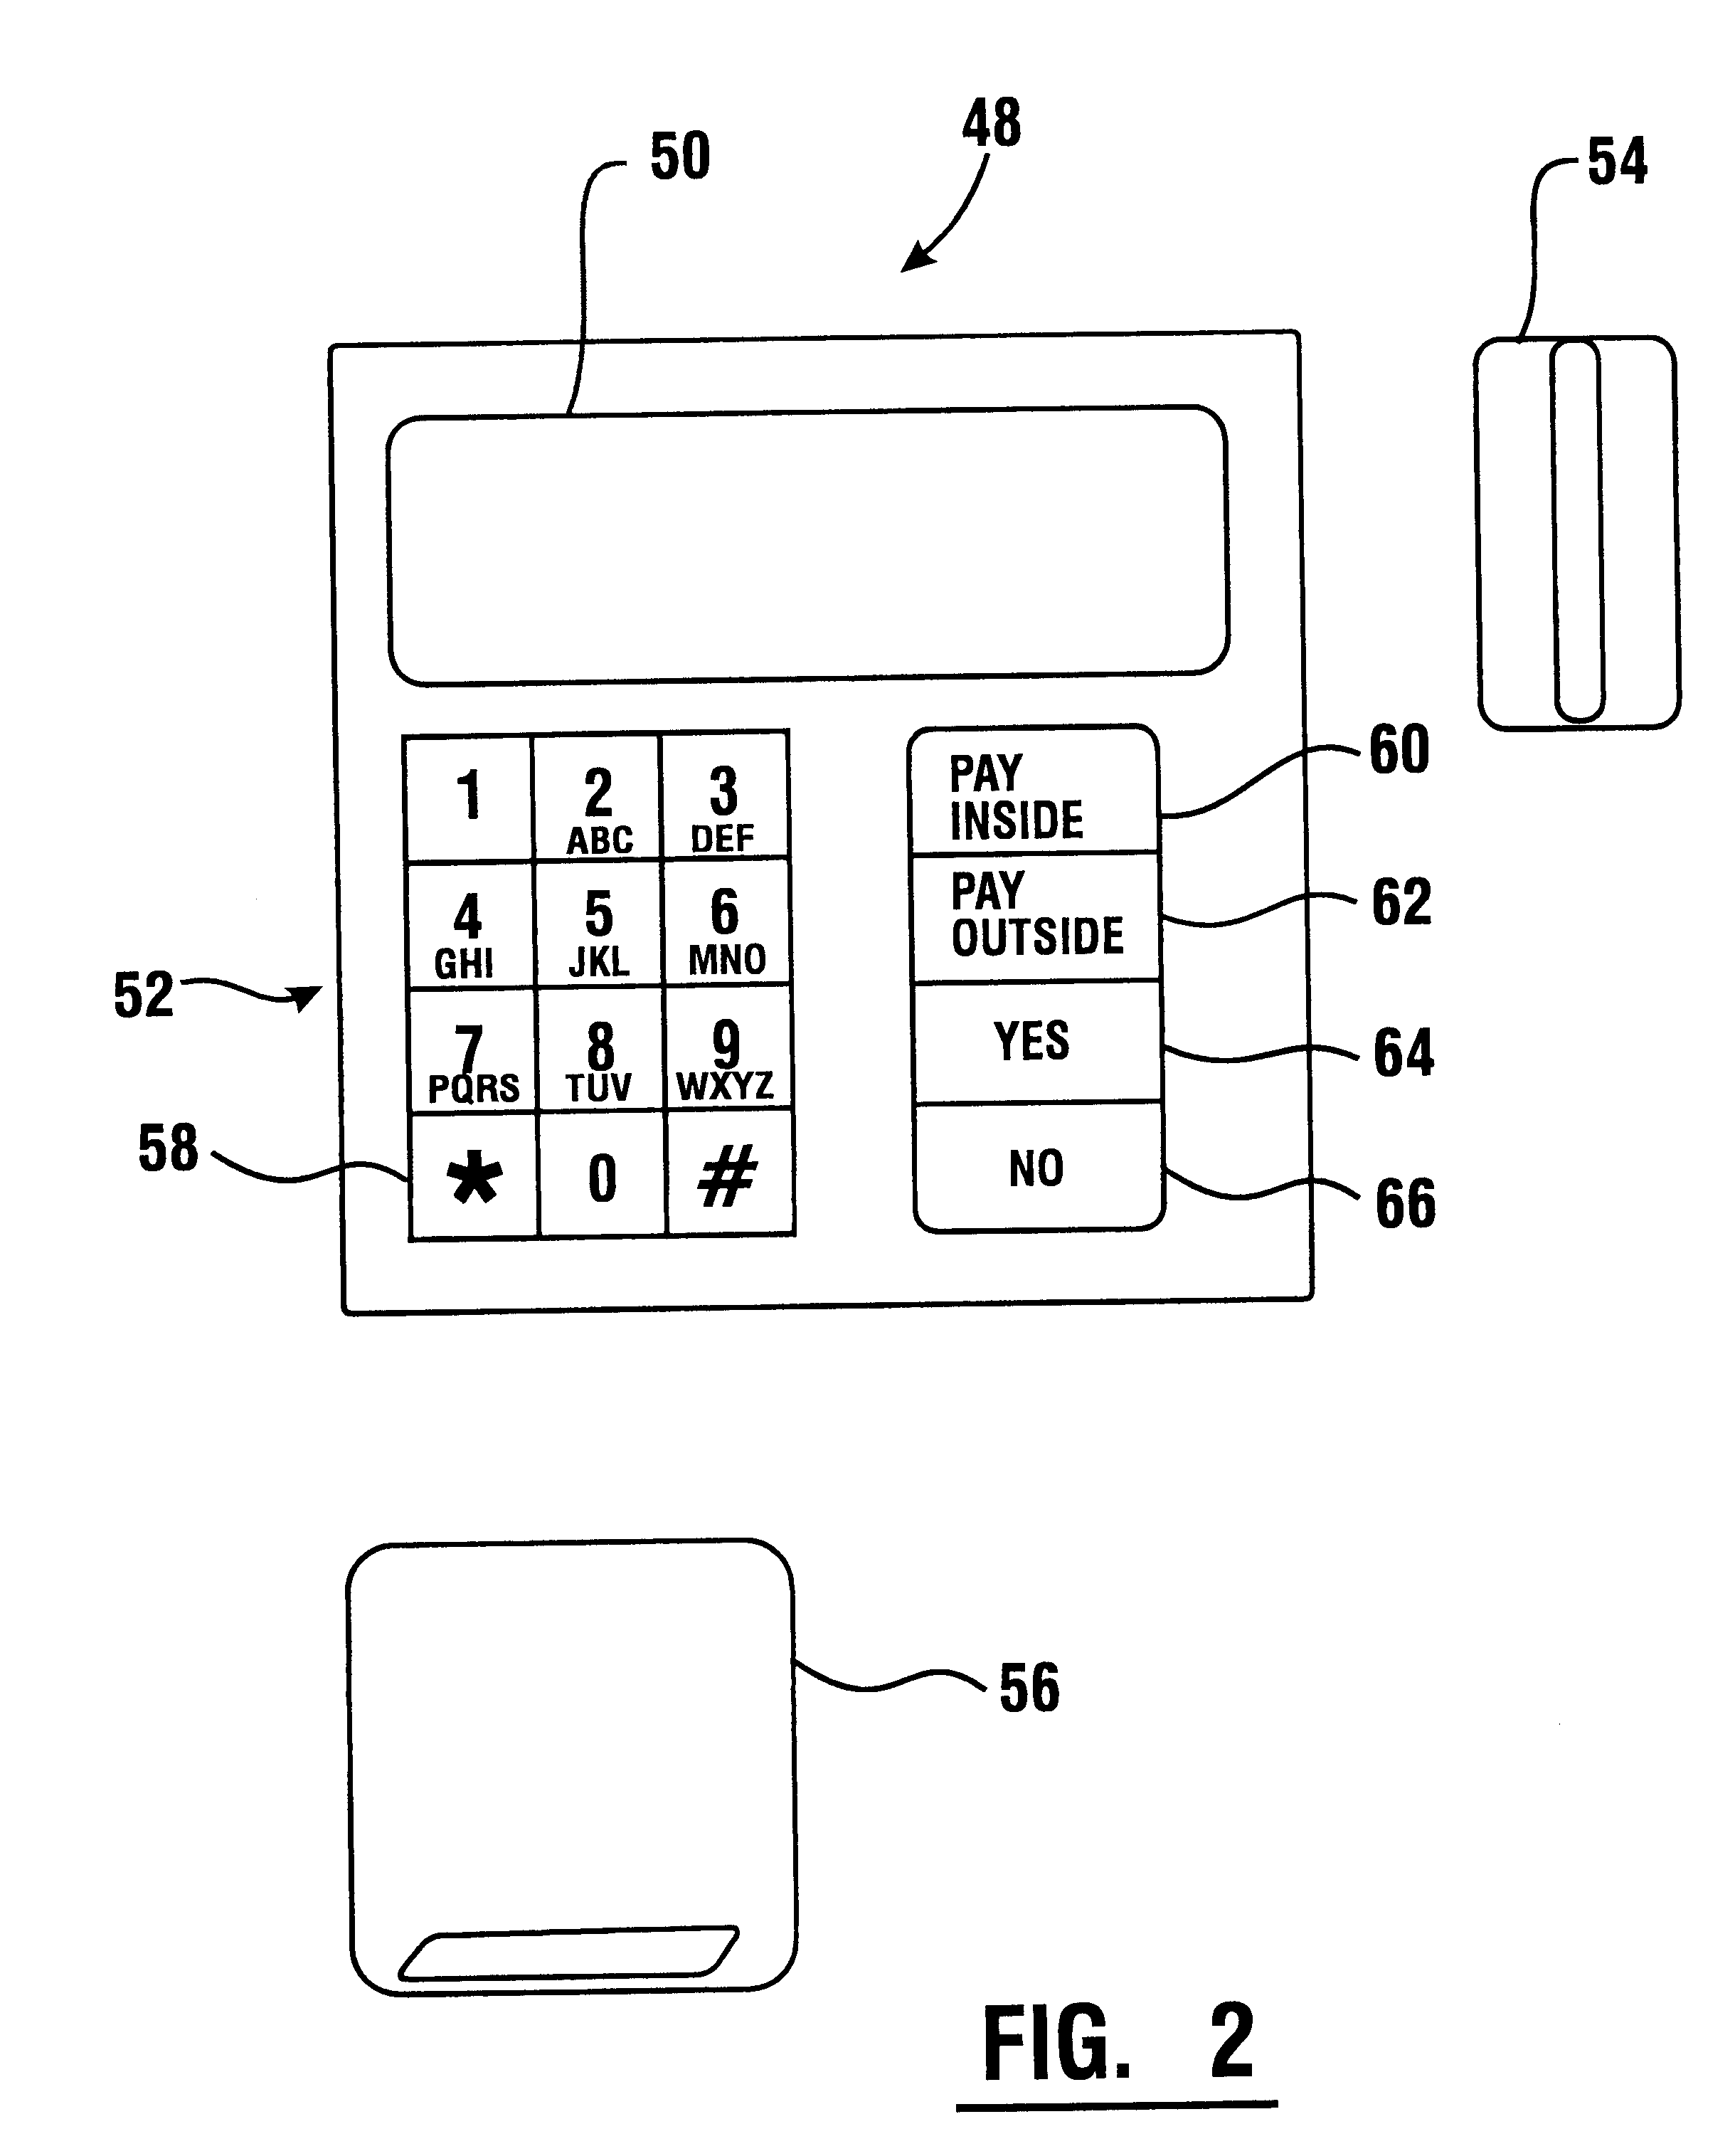 Cash dispensing system for merchandise delivery facility